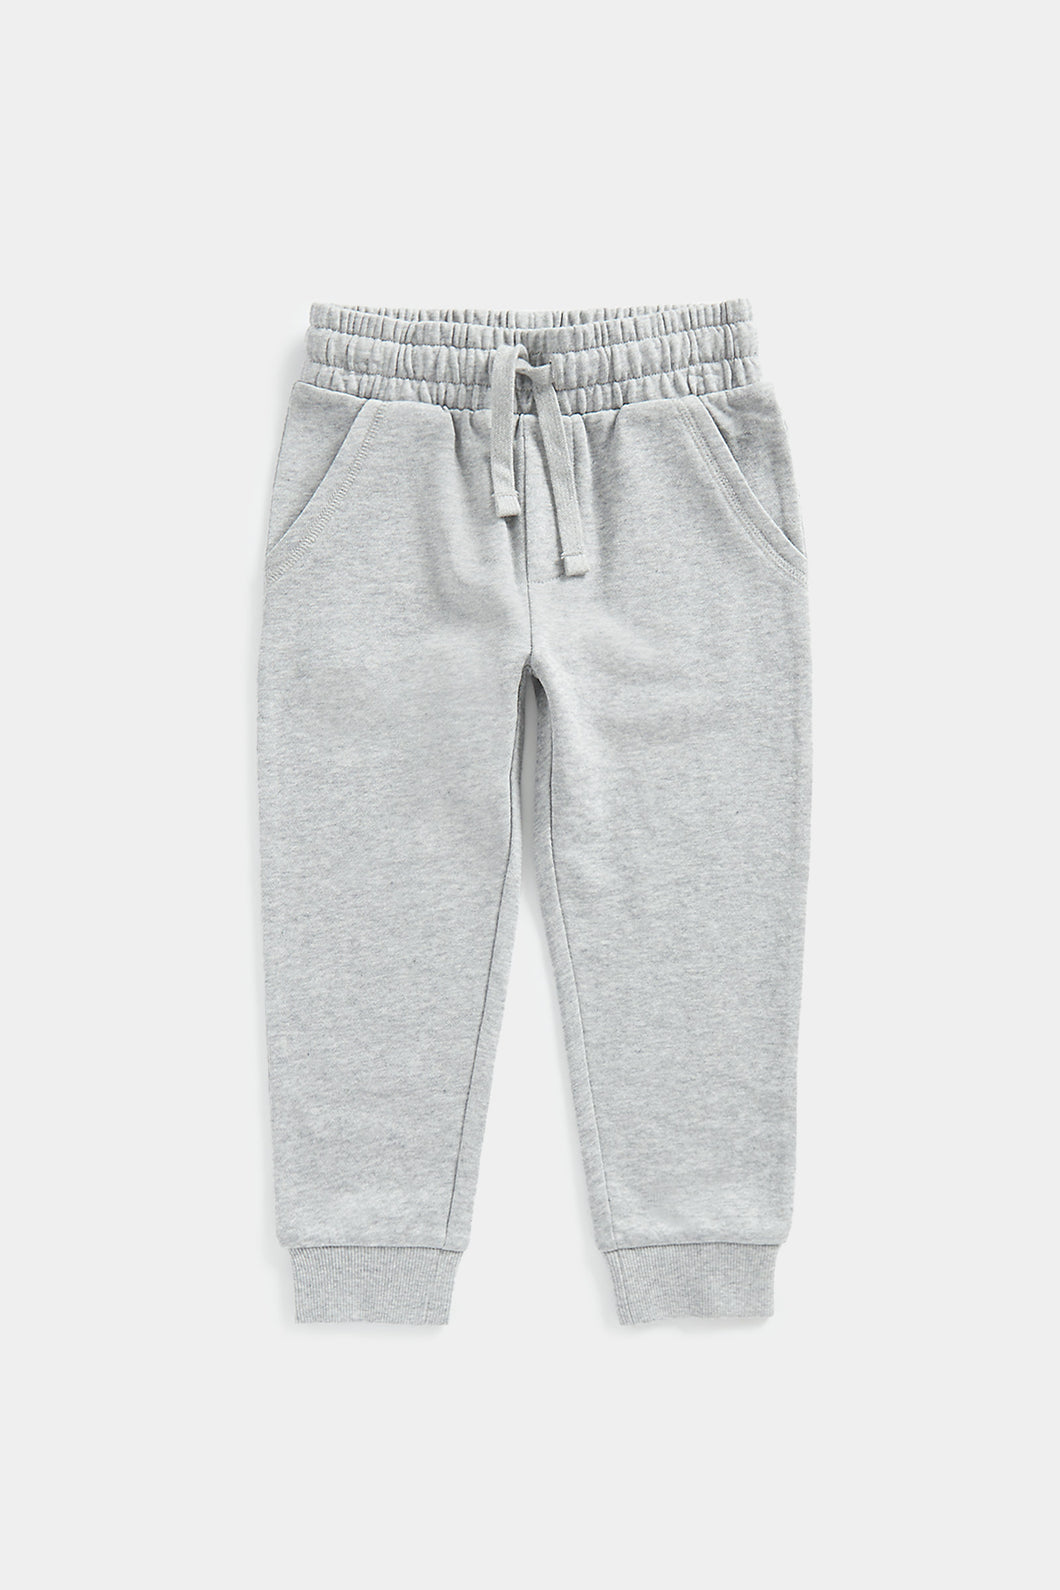 Mothercare Grey Joggers